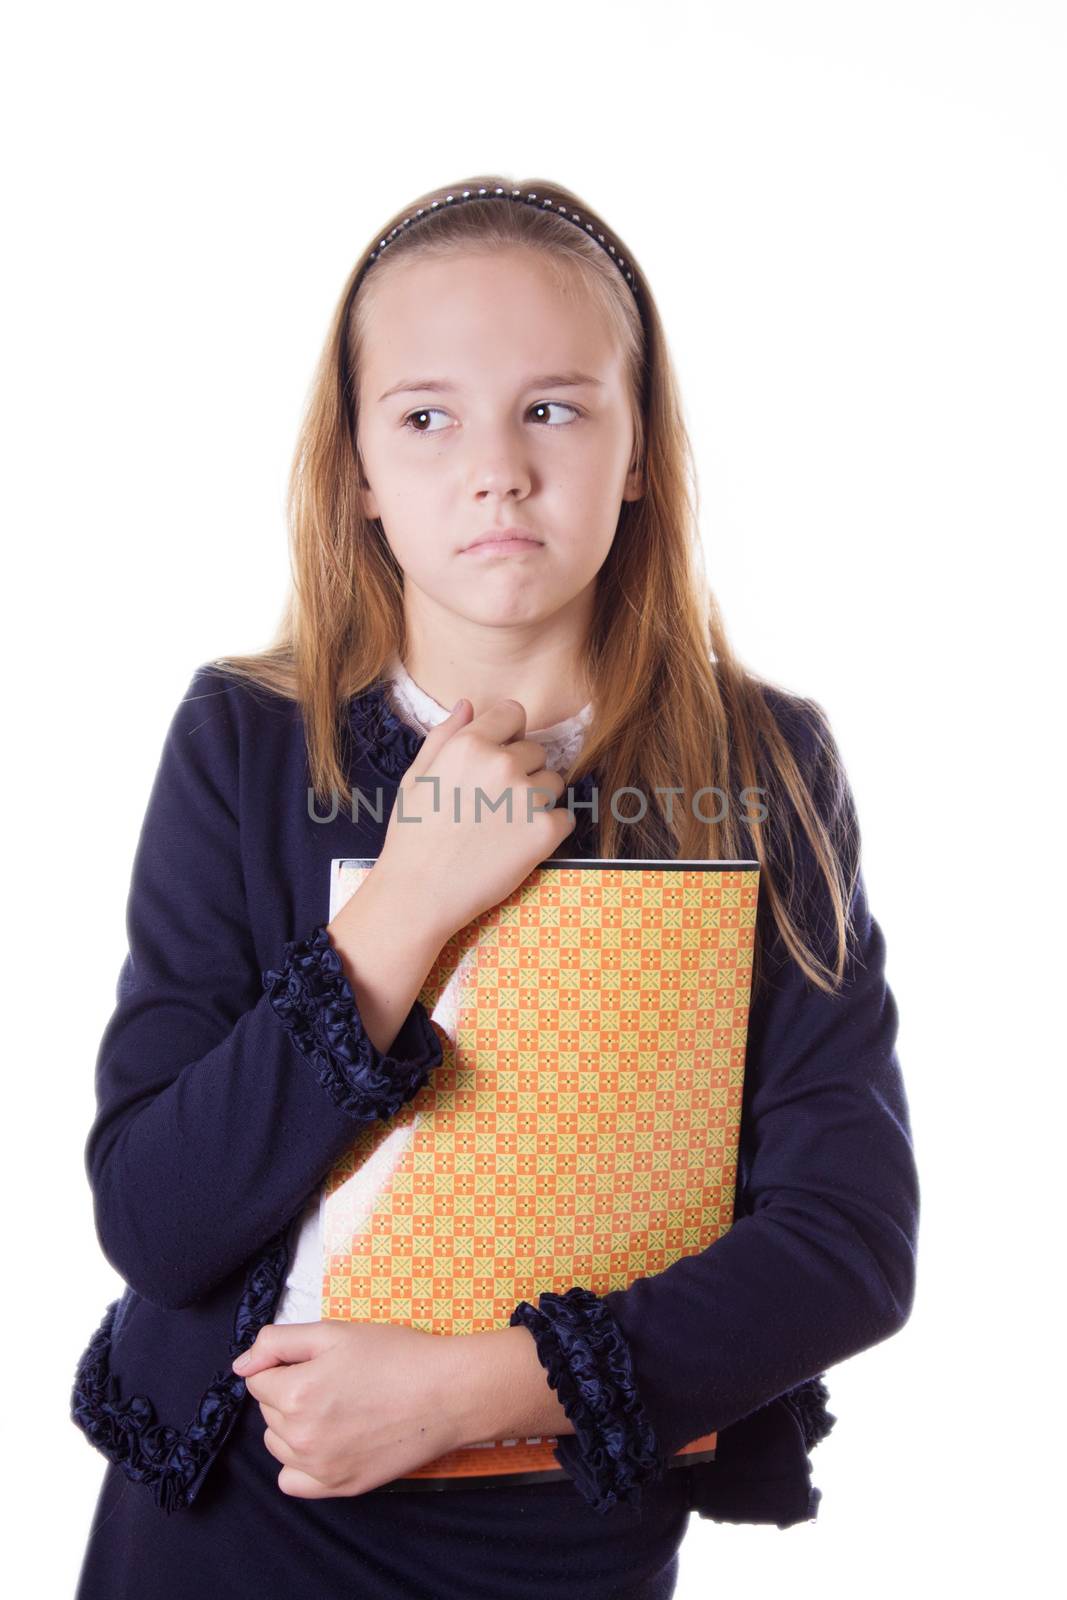 Upset schoolgirl in uniform and books looking aside isolated on white